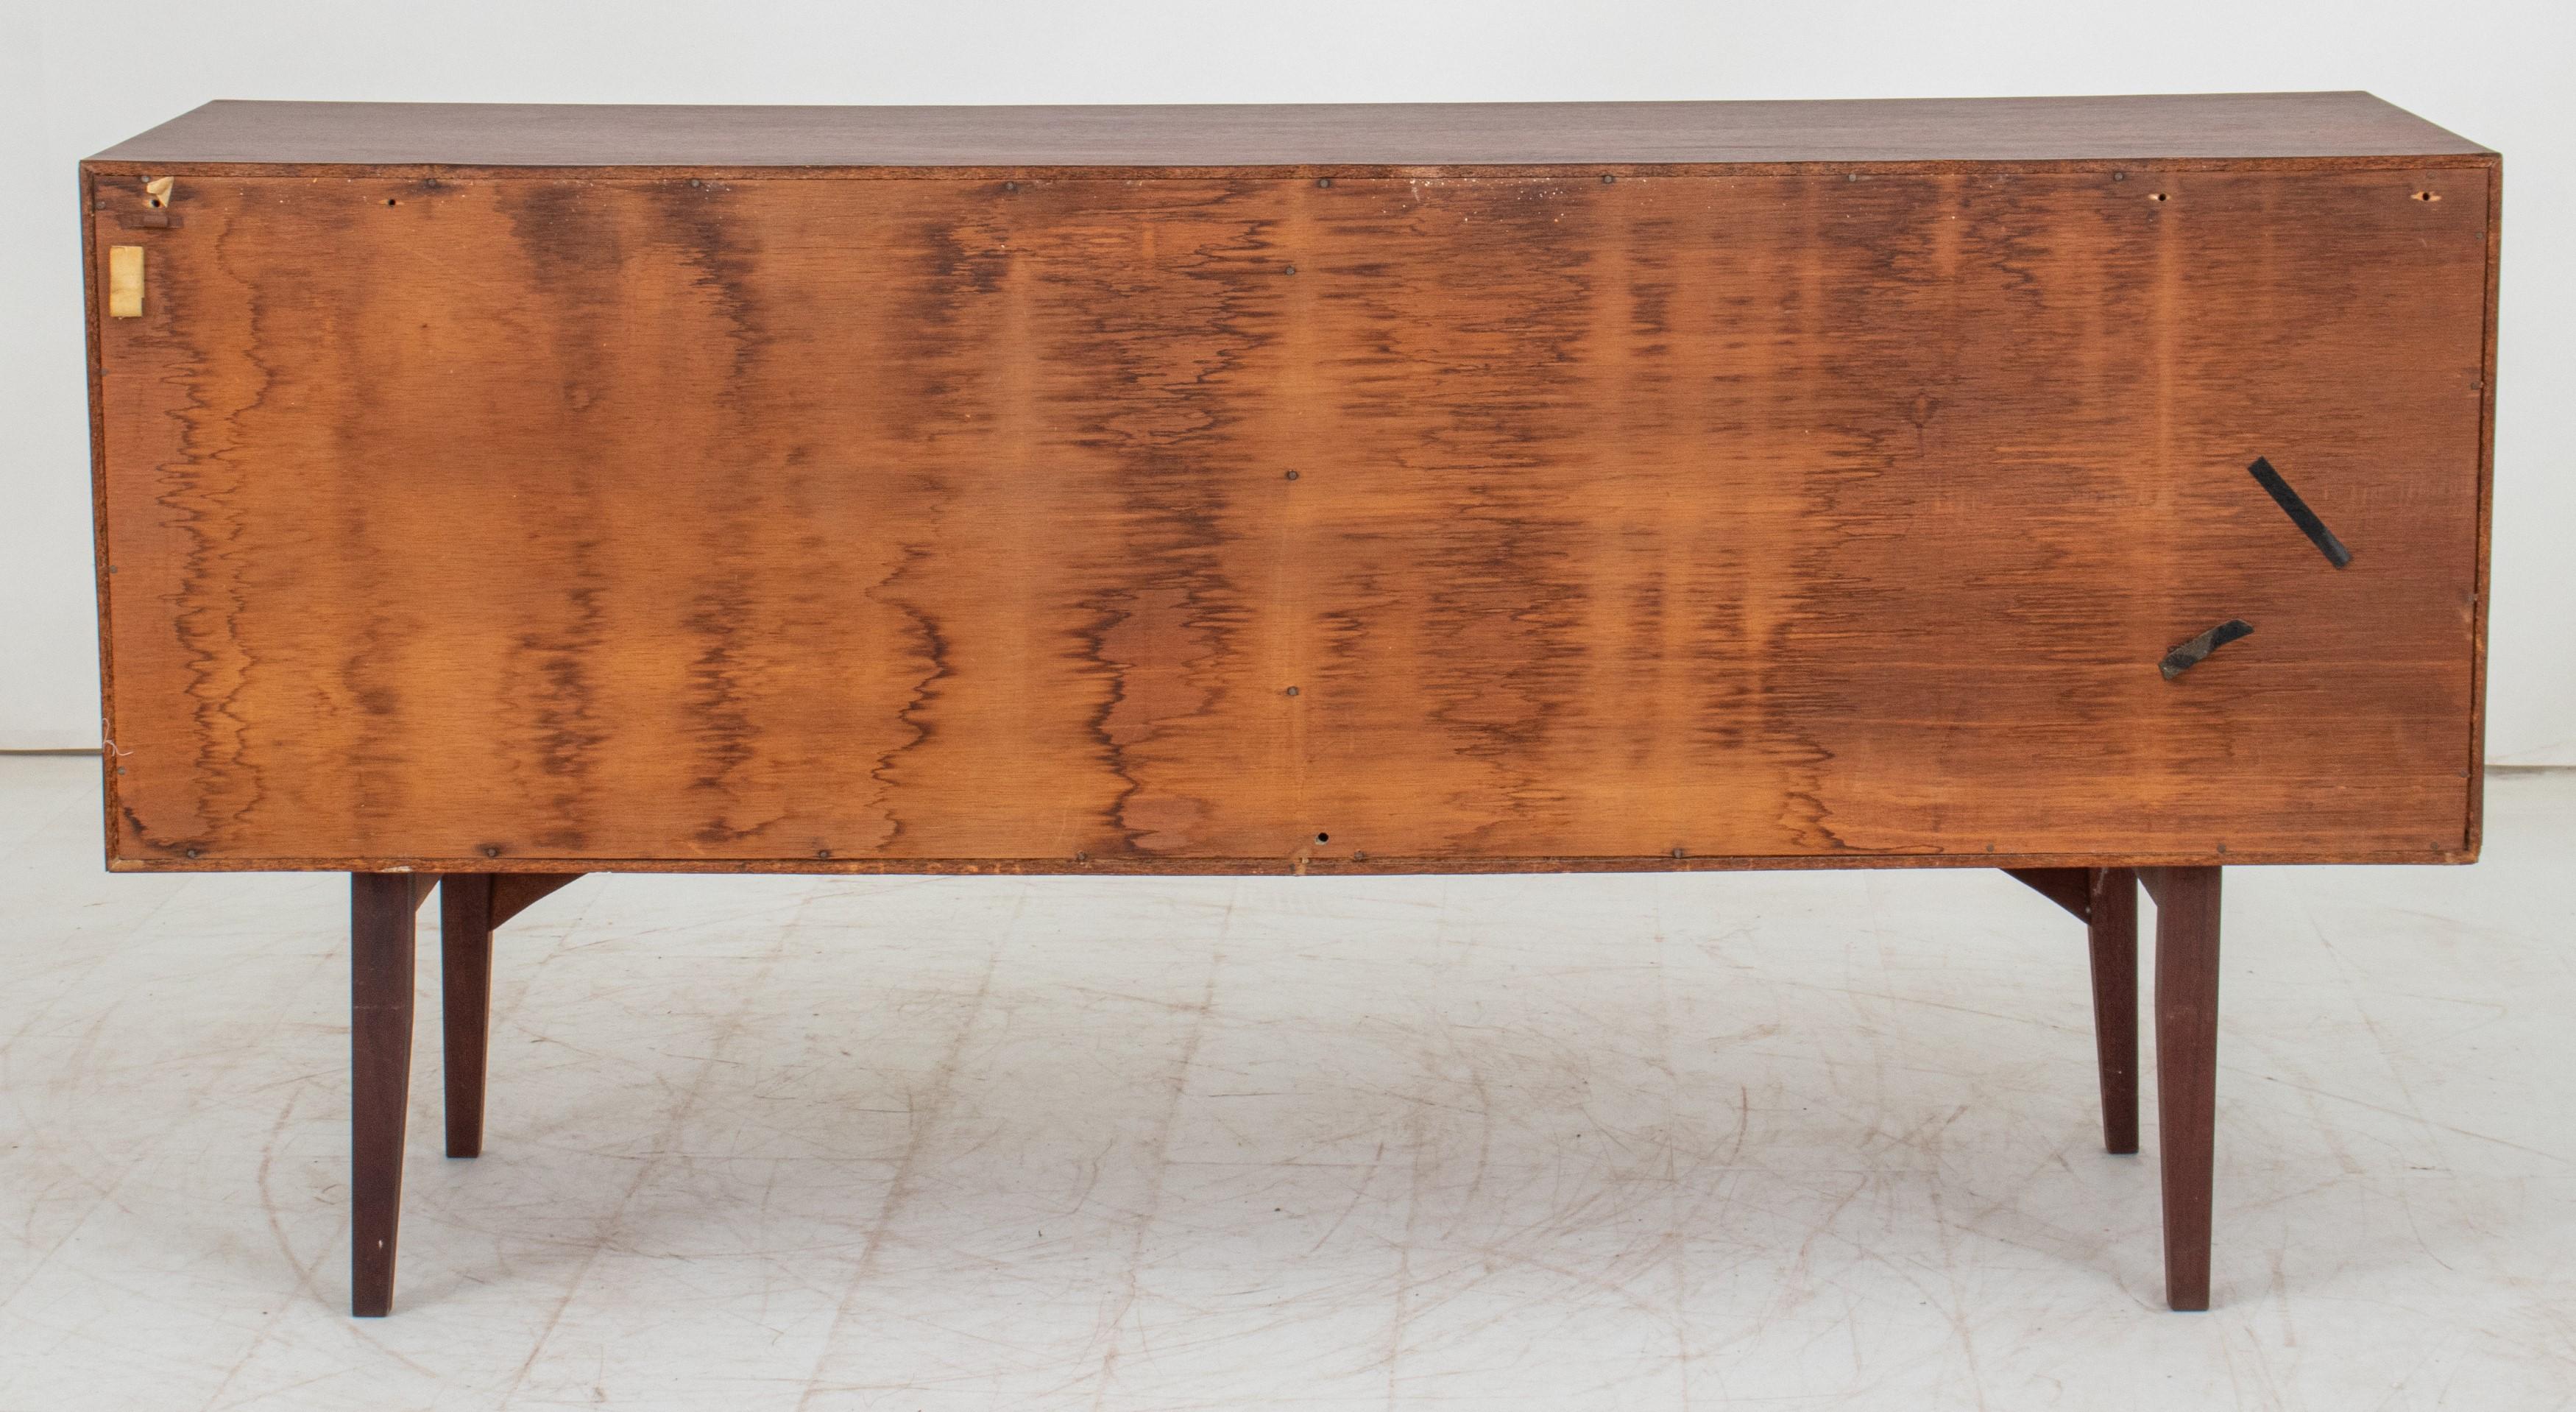 Mid-Century Modern Danish Teakwood Credenza. Here's the information:

Style: Mid-Century Modern (MCM)
Material: Teakwood
Features:
Two sliding doors
Four tapered legs
Apparently unmarked, which is not uncommon for some vintage